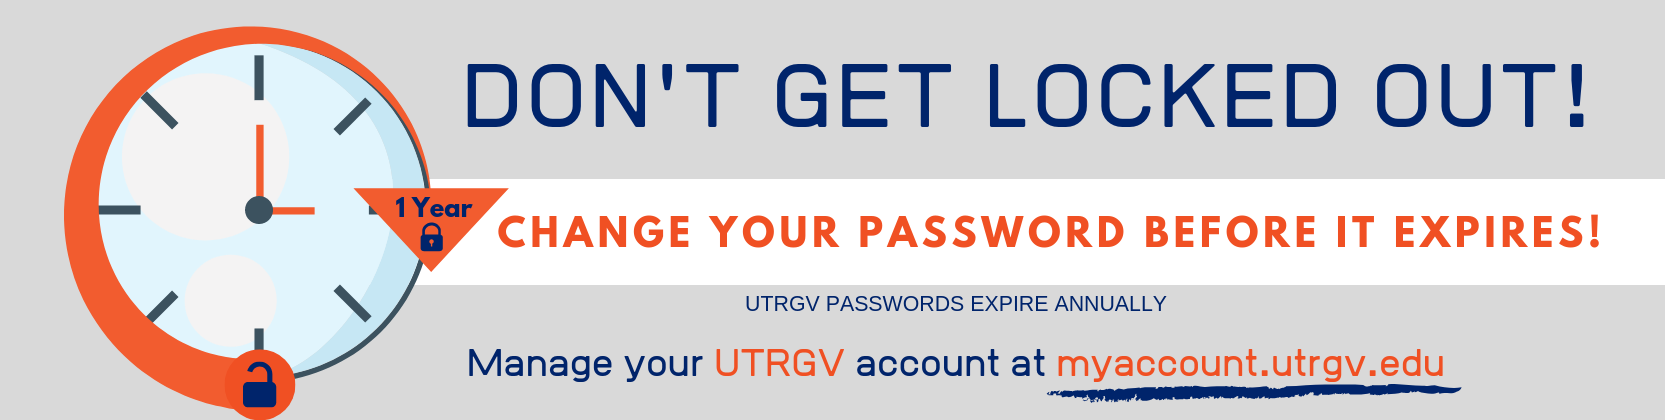 Don't get locked out! Change your password before it expires. click here to learn more.  Page Banner 